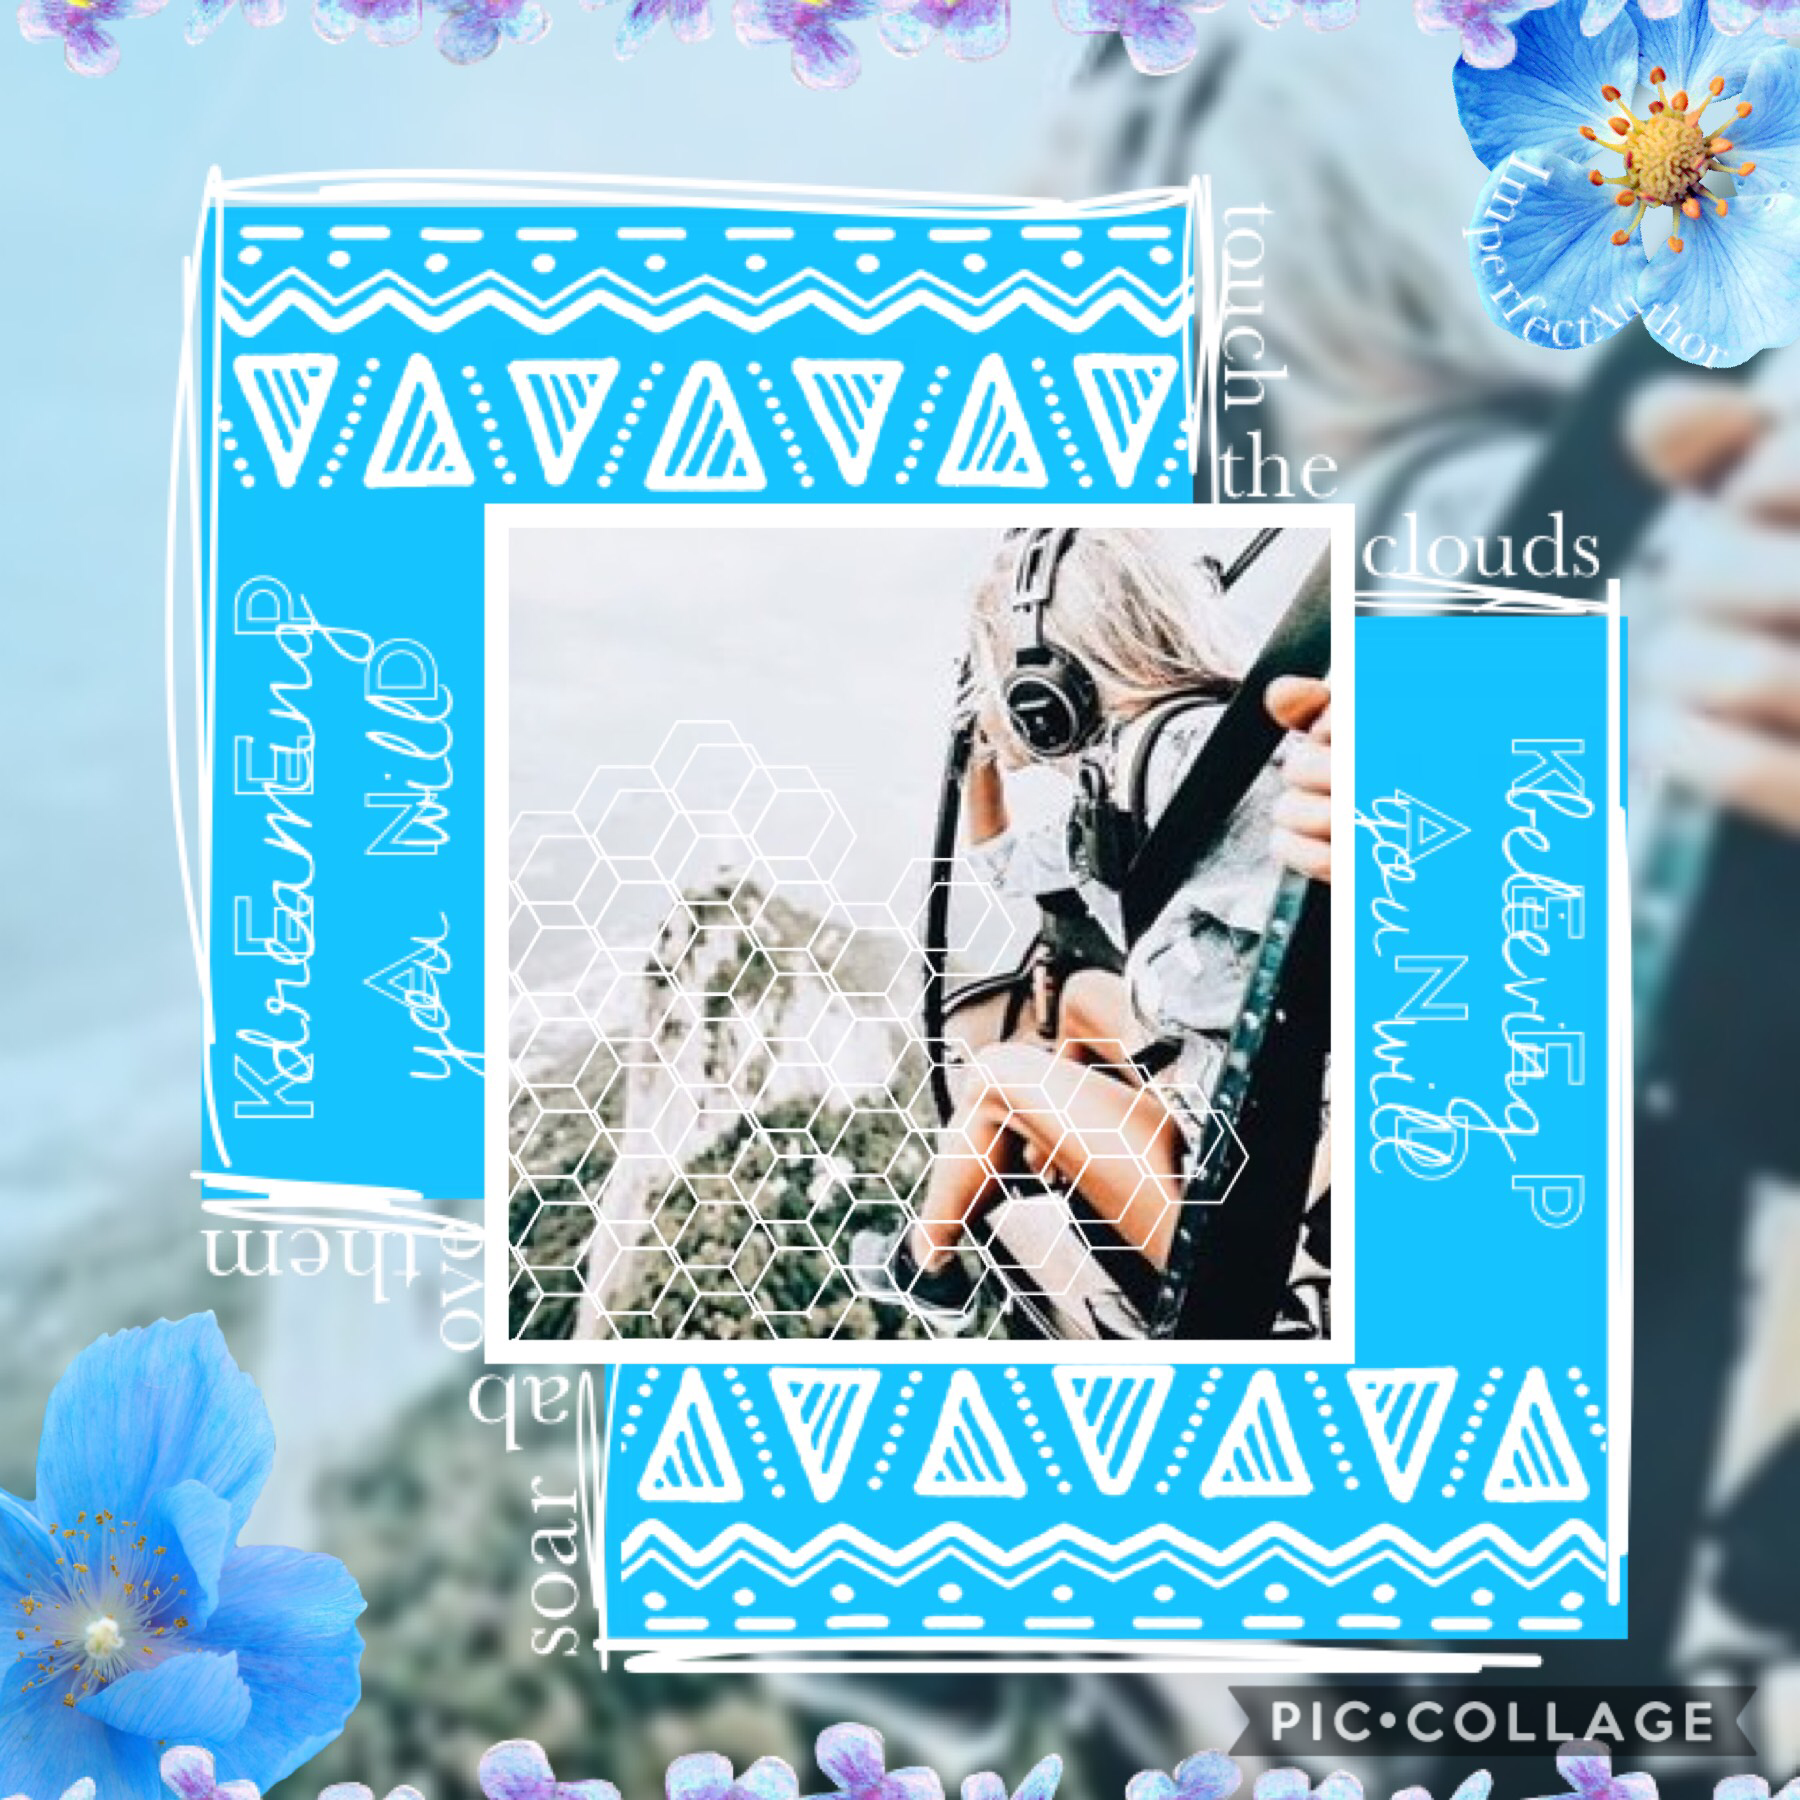 💙•Tap!•💙

Wow I made another one!

Lol I was bored so I made another collage with the same style. Should I do more like these?

💙🧢🦋💧🚙